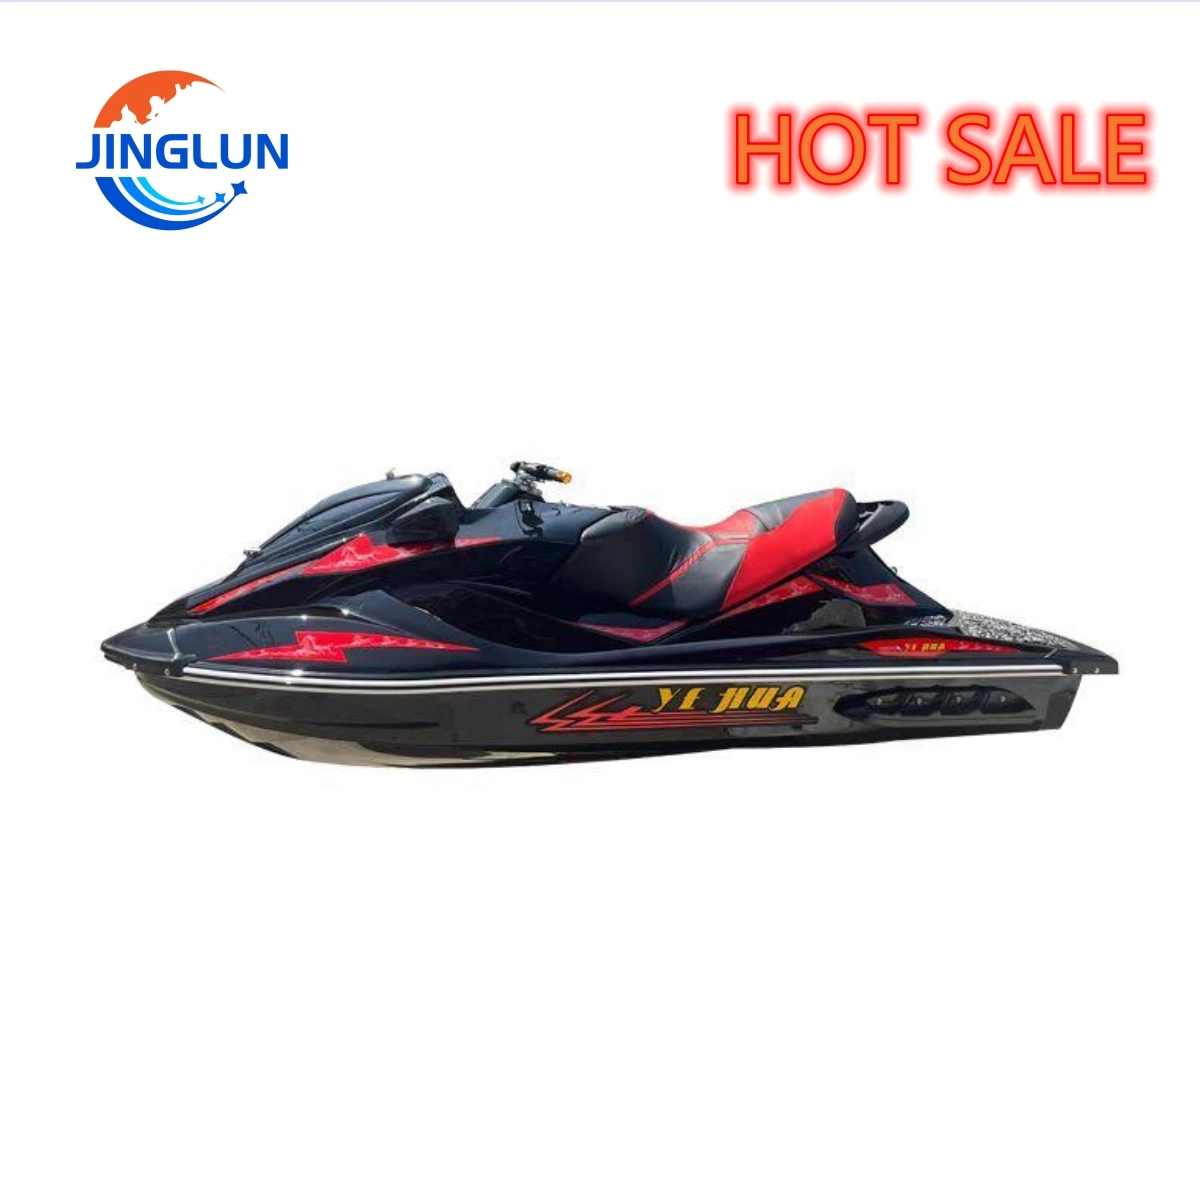 Modern Boat for Fun Water Car Water Sport Jet Motor Boat Entertainment Equipment Floating Luxury Jet Ski on The Water